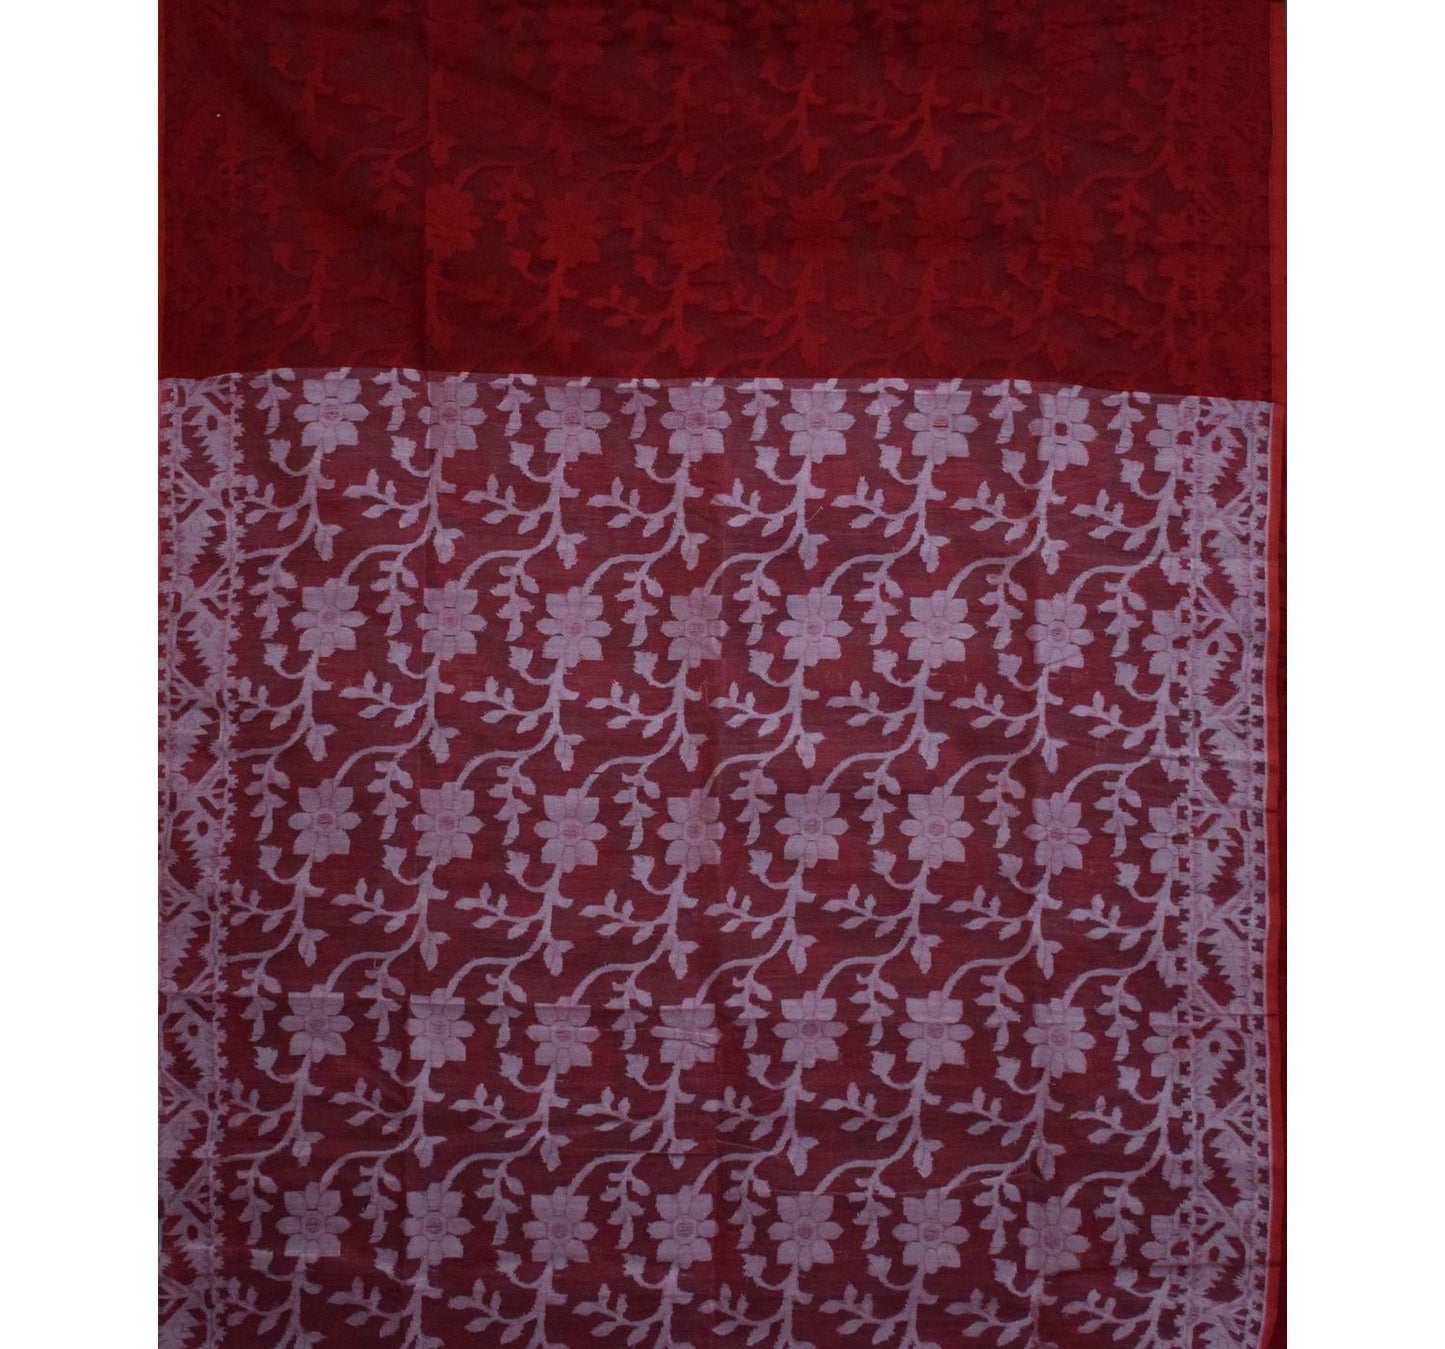 Red and White Floral Handloom Cotton Saree